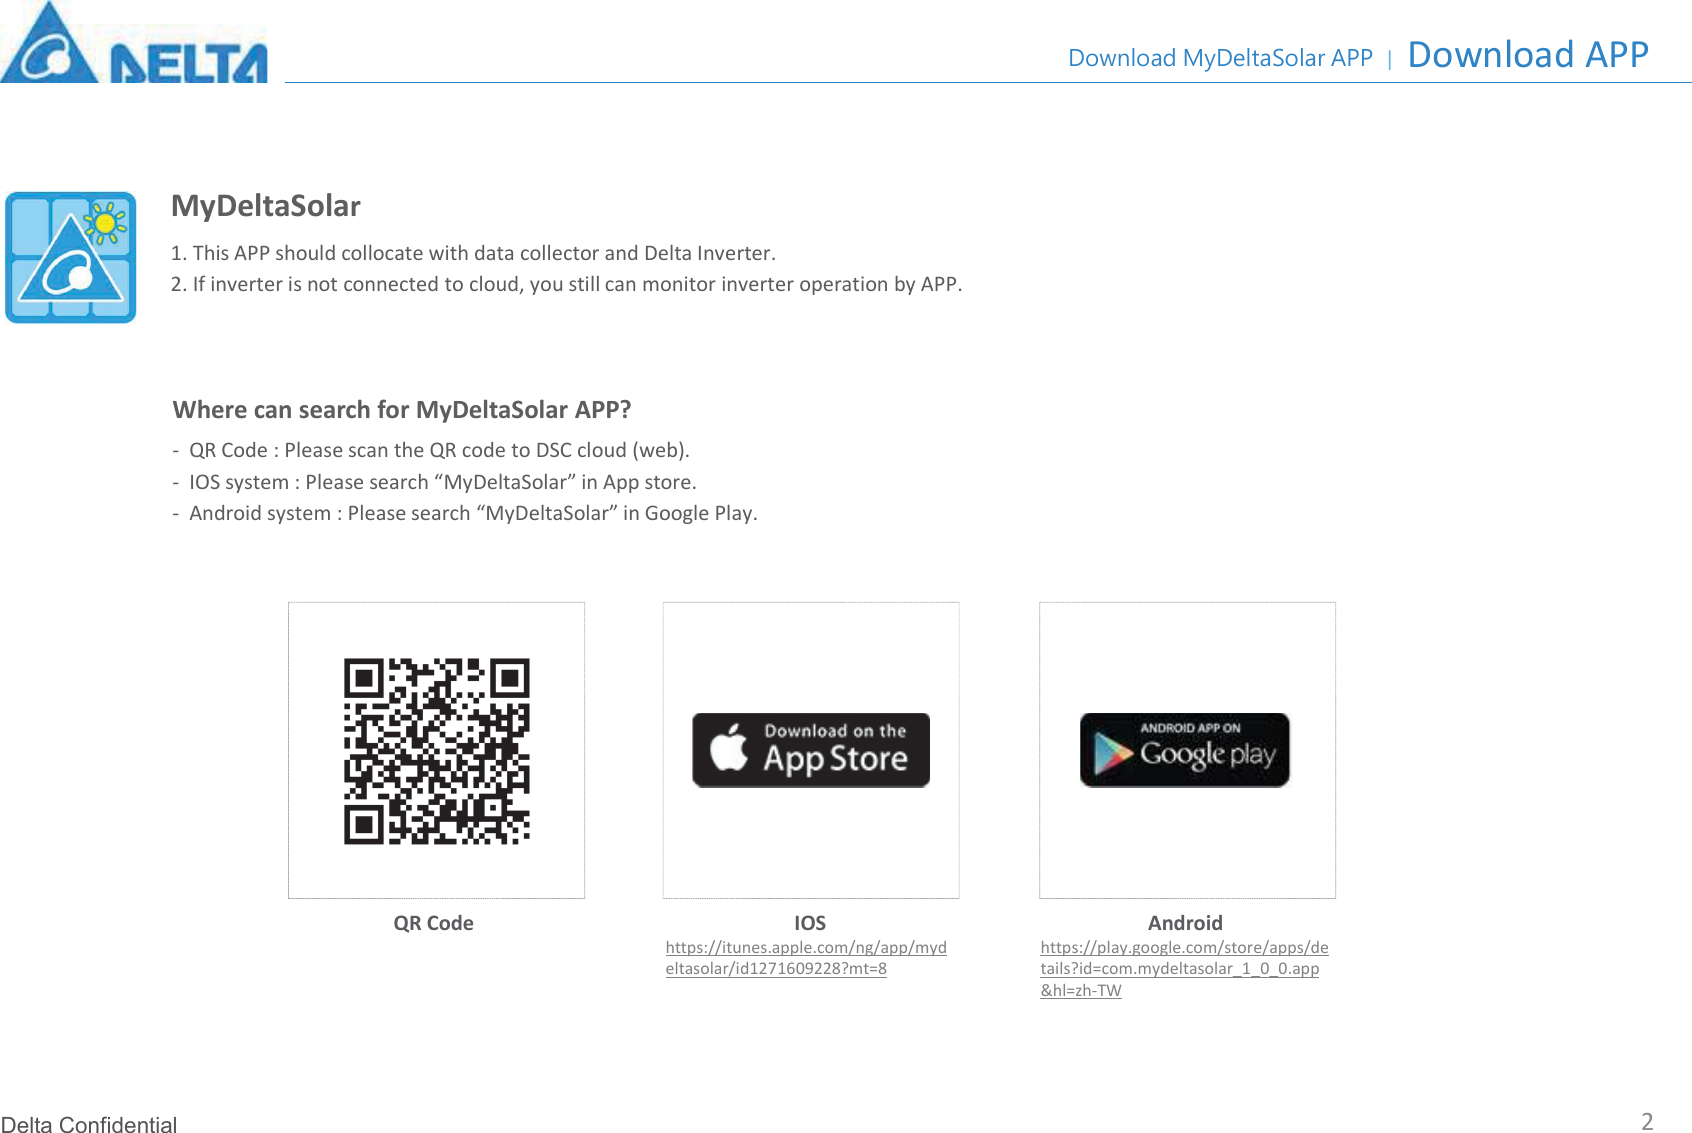 Delta Confidential1. This APP should collocate with data collector and Delta Inverter.2. If inverter is not connected to cloud, you still can monitor inverter operation by APP.MyDeltaSolarQR Code IOShttps://itunes.apple.com/ng/app/mydeltasolar/id1271609228?mt=8Android https://play.google.com/store/apps/details?id=com.mydeltasolar_1_0_0.app&amp;hl=zh-TWWhere can search for MyDeltaSolar APP?- QR Code : Please scan the QR code to DSC cloud (web).- IOS system : Please search “MyDeltaSolar” in App store.- Android system : Please search “MyDeltaSolar” in Google Play.Download APP&apos;RZQORDG0\&apos;HOWD6RODU$33 |2